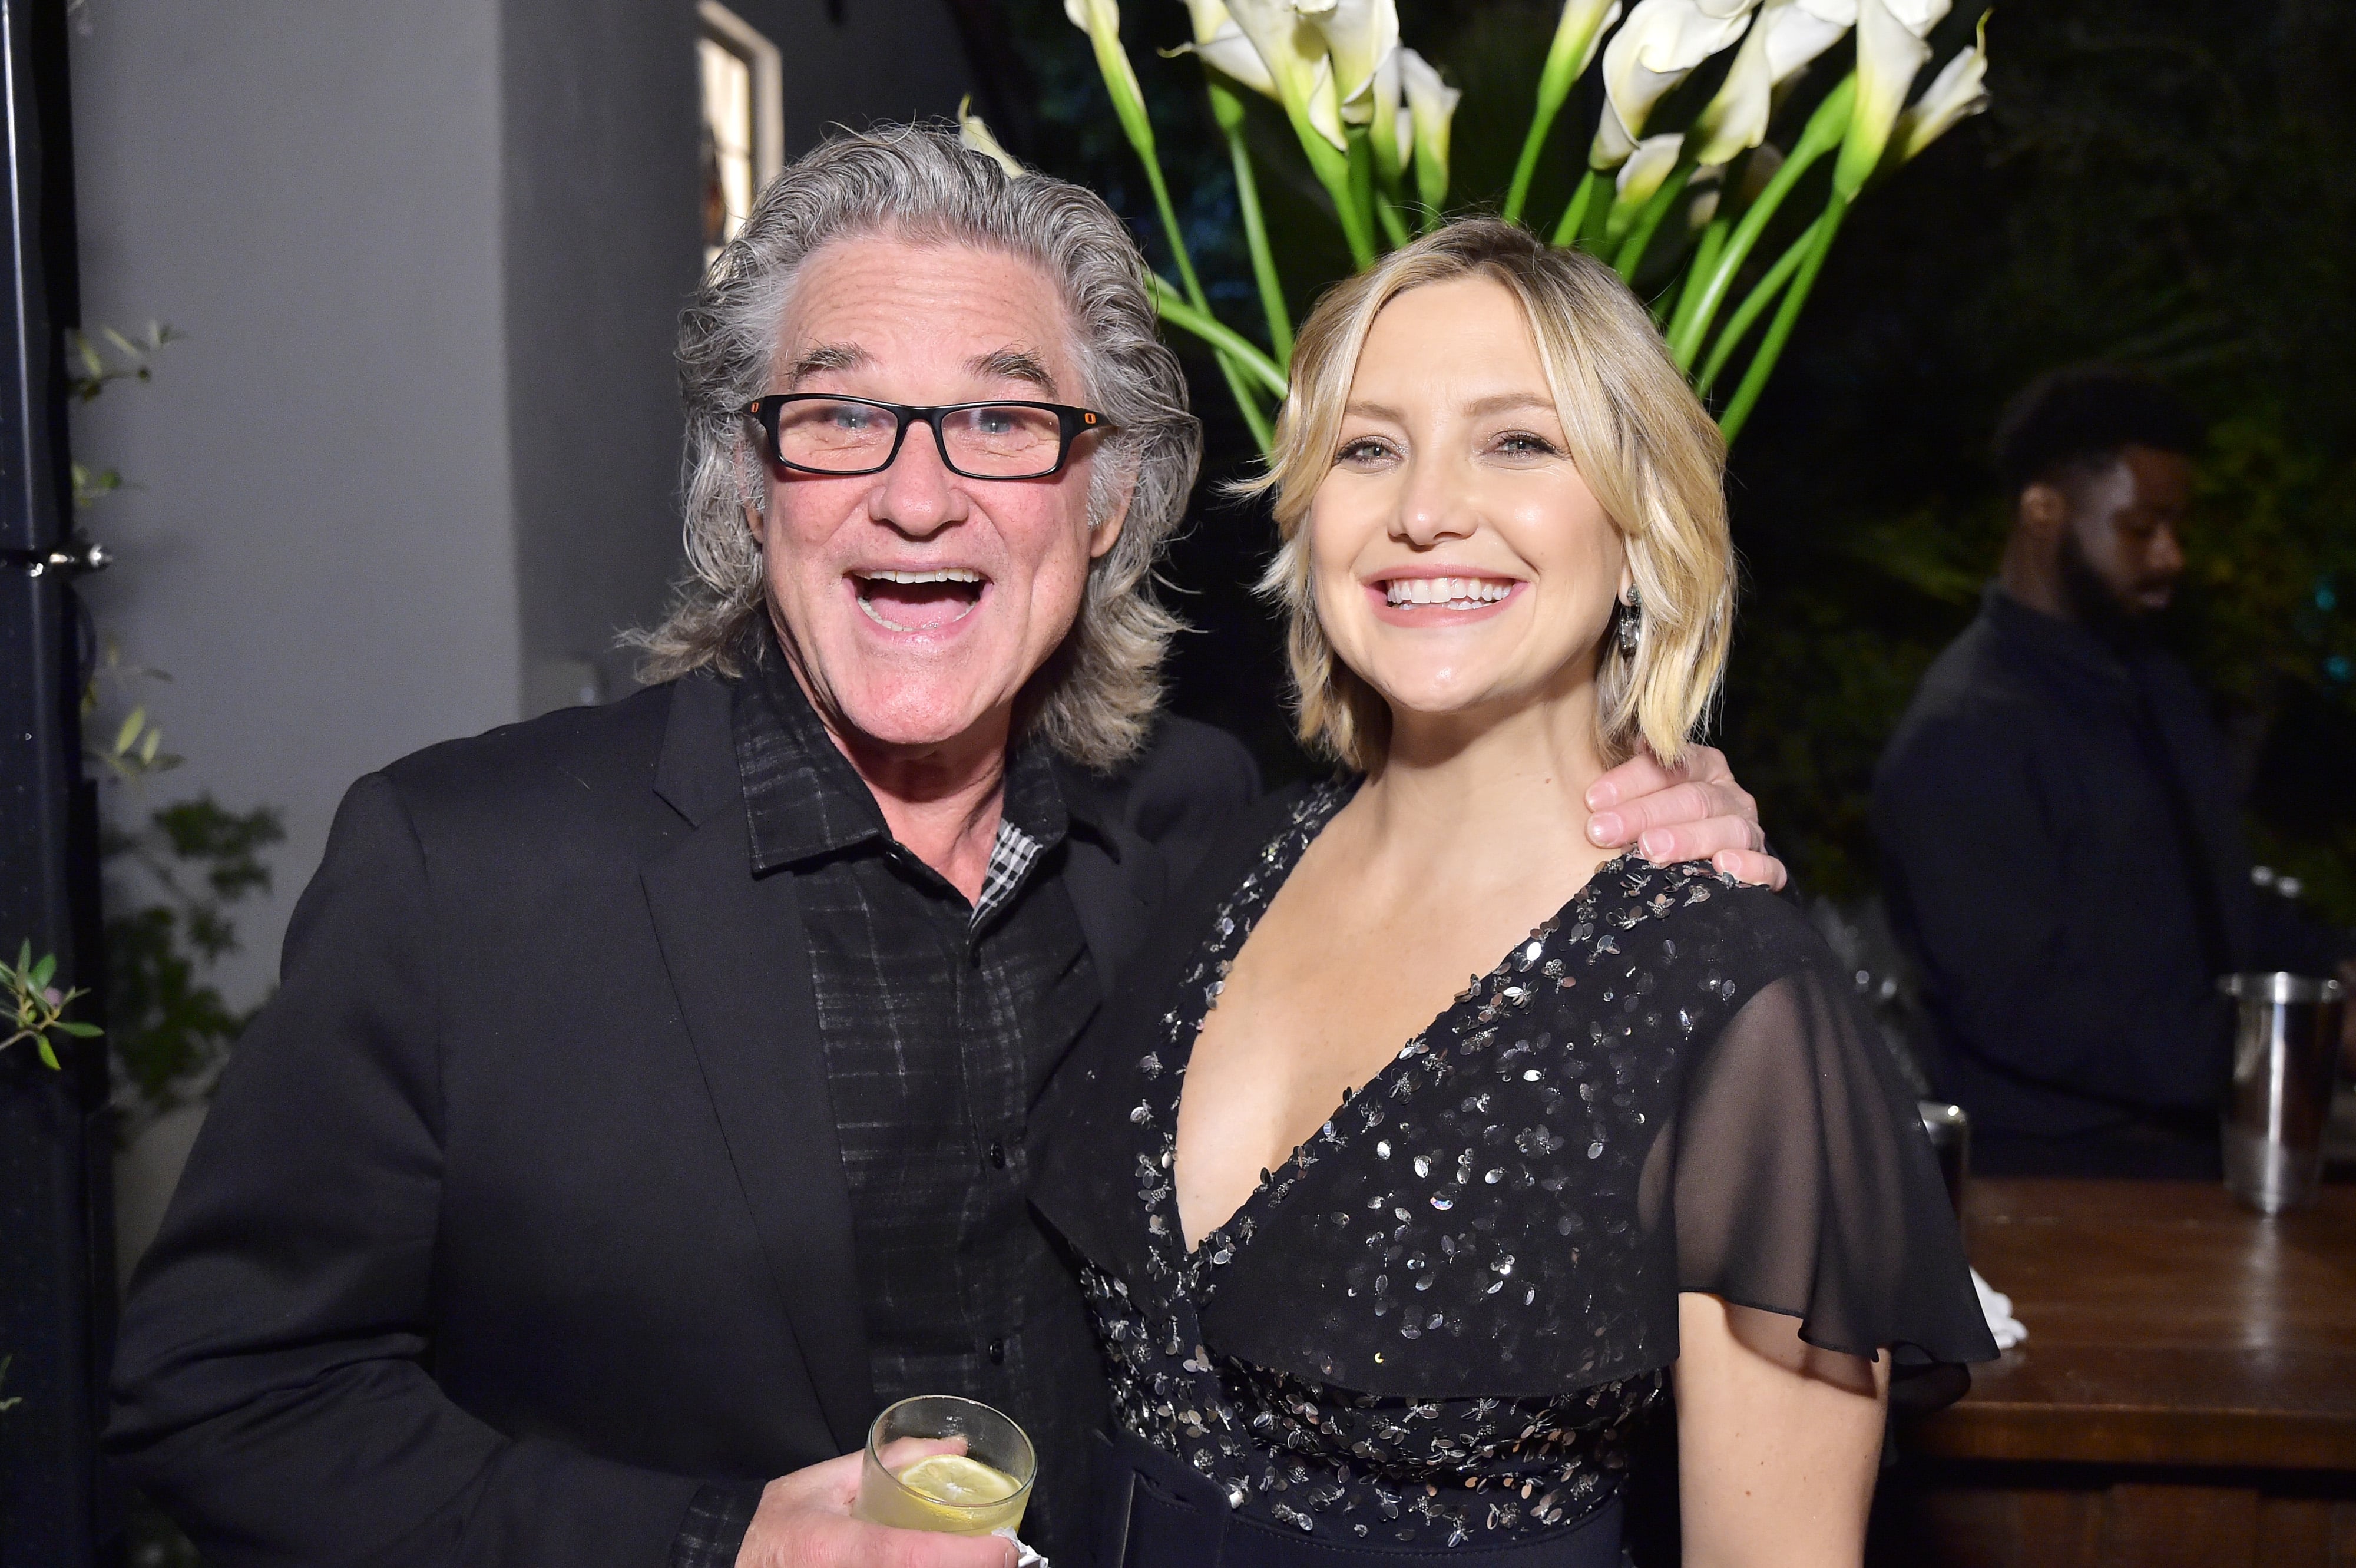 Who Are Kate Hudson's Parents?